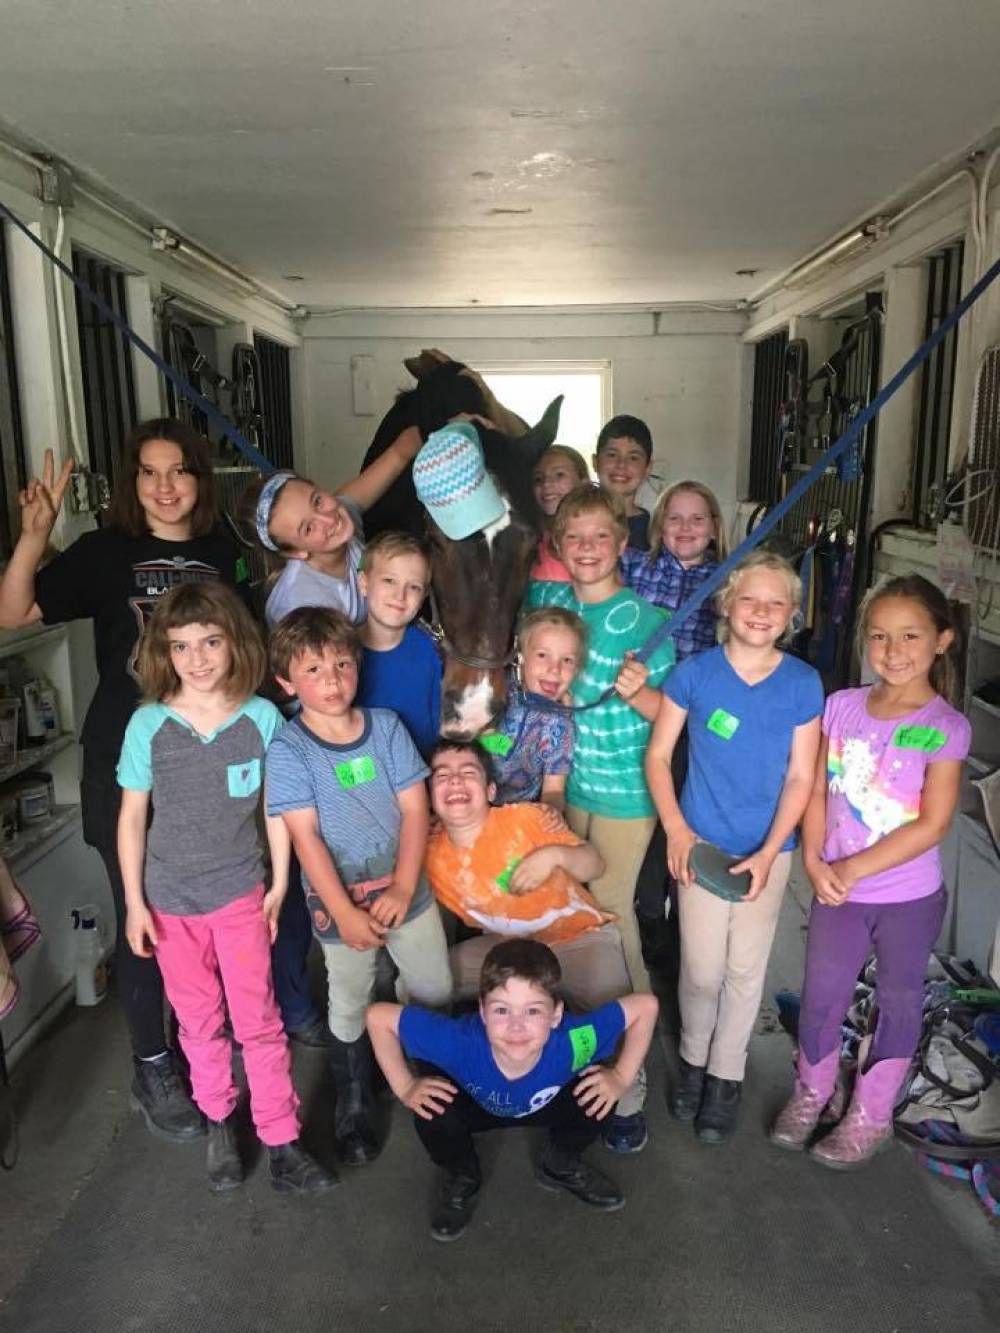 TOP RHODE ISLAND COED CAMP: Faith Hill Farm is a Top Coed Summer Camp located in East Greenwich Rhode Island offering many fun and enriching Coed and other camp programs. 